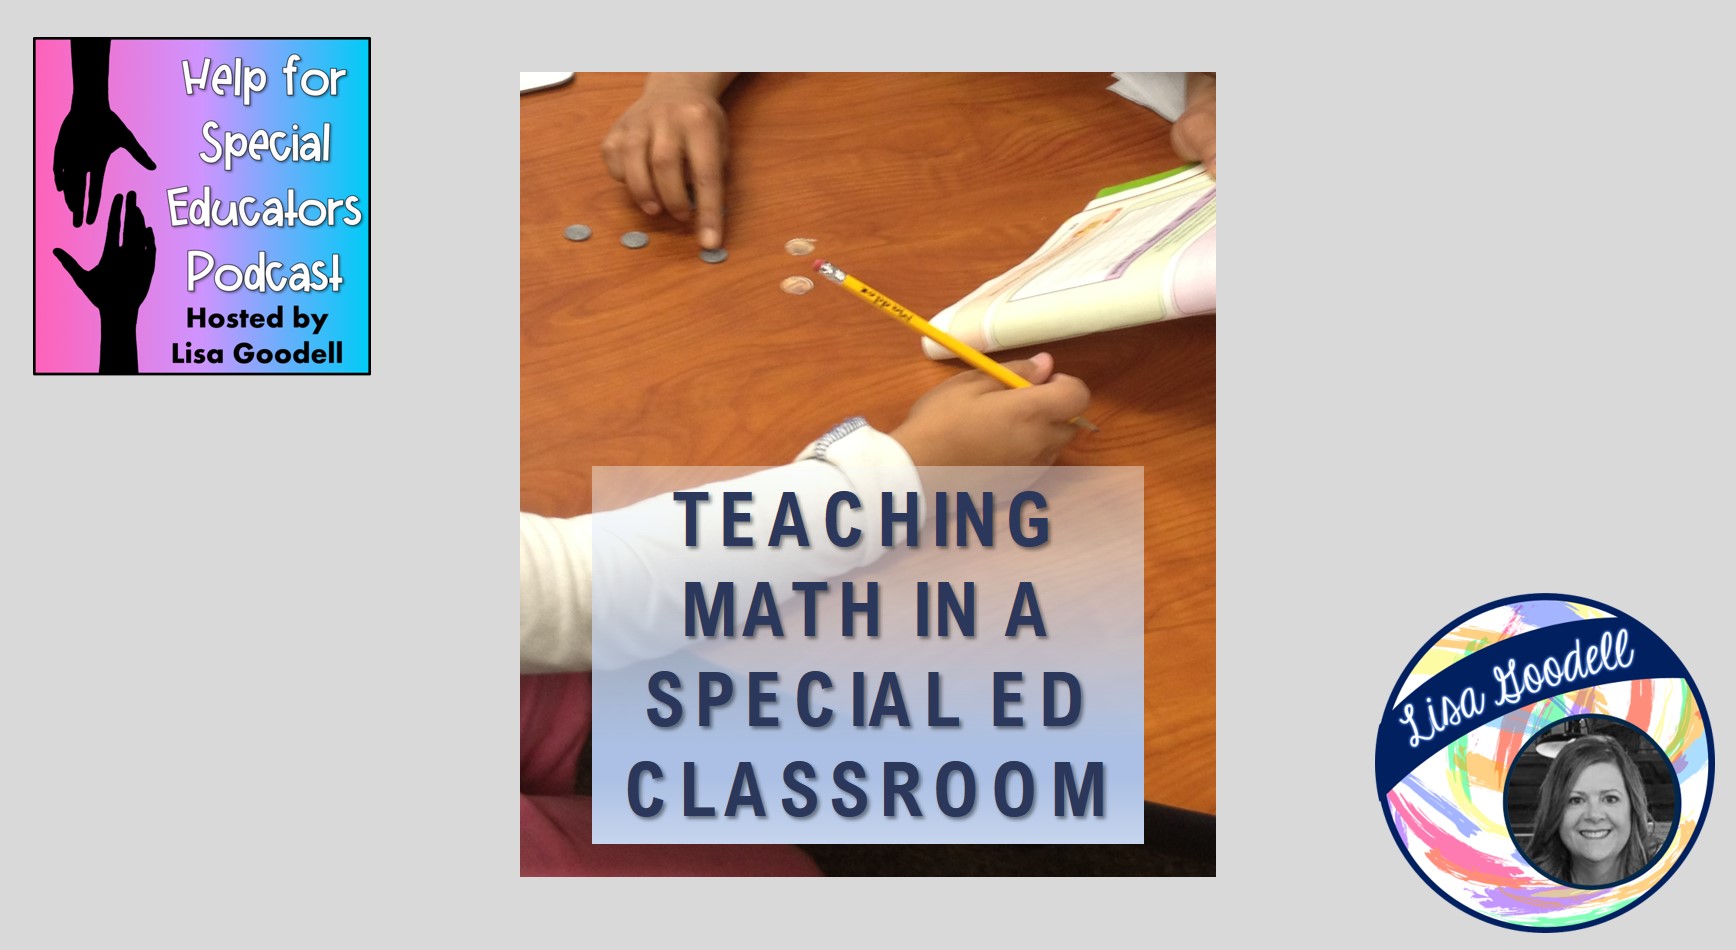 Teaching Math cover with book, pencil, hands, coins